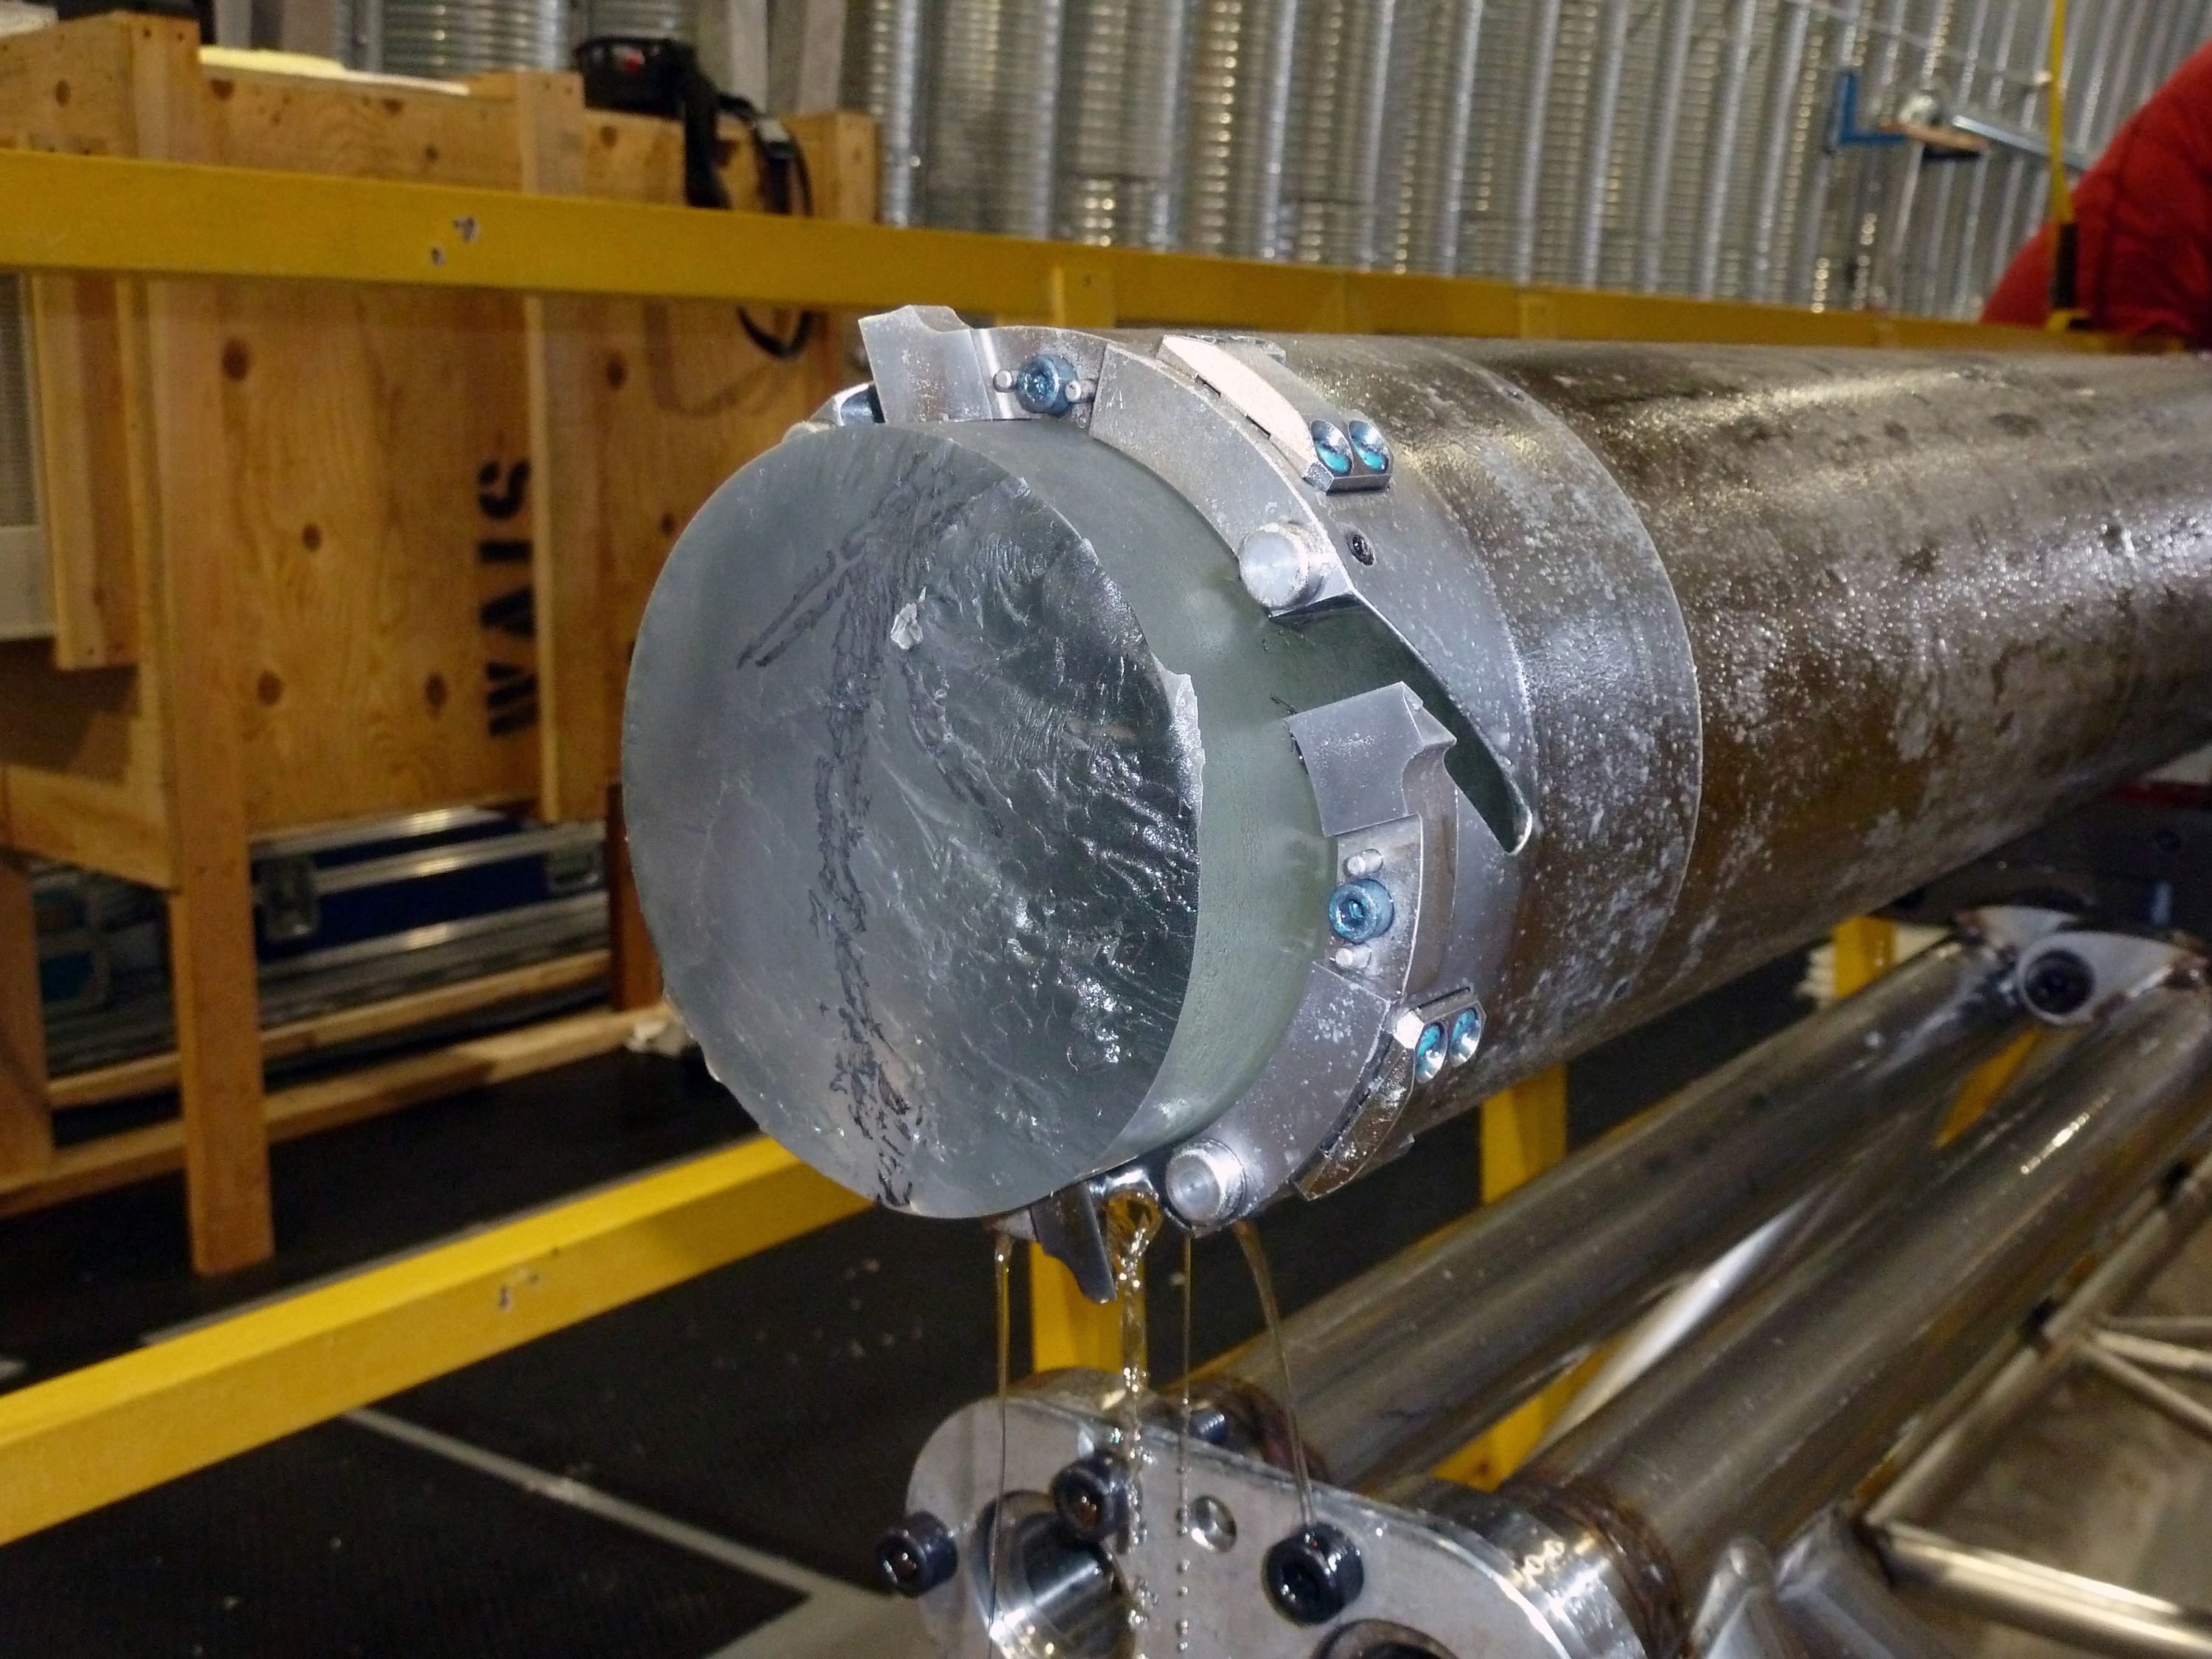 The DISC Drill's cutter head and core barrel with an ice core inside